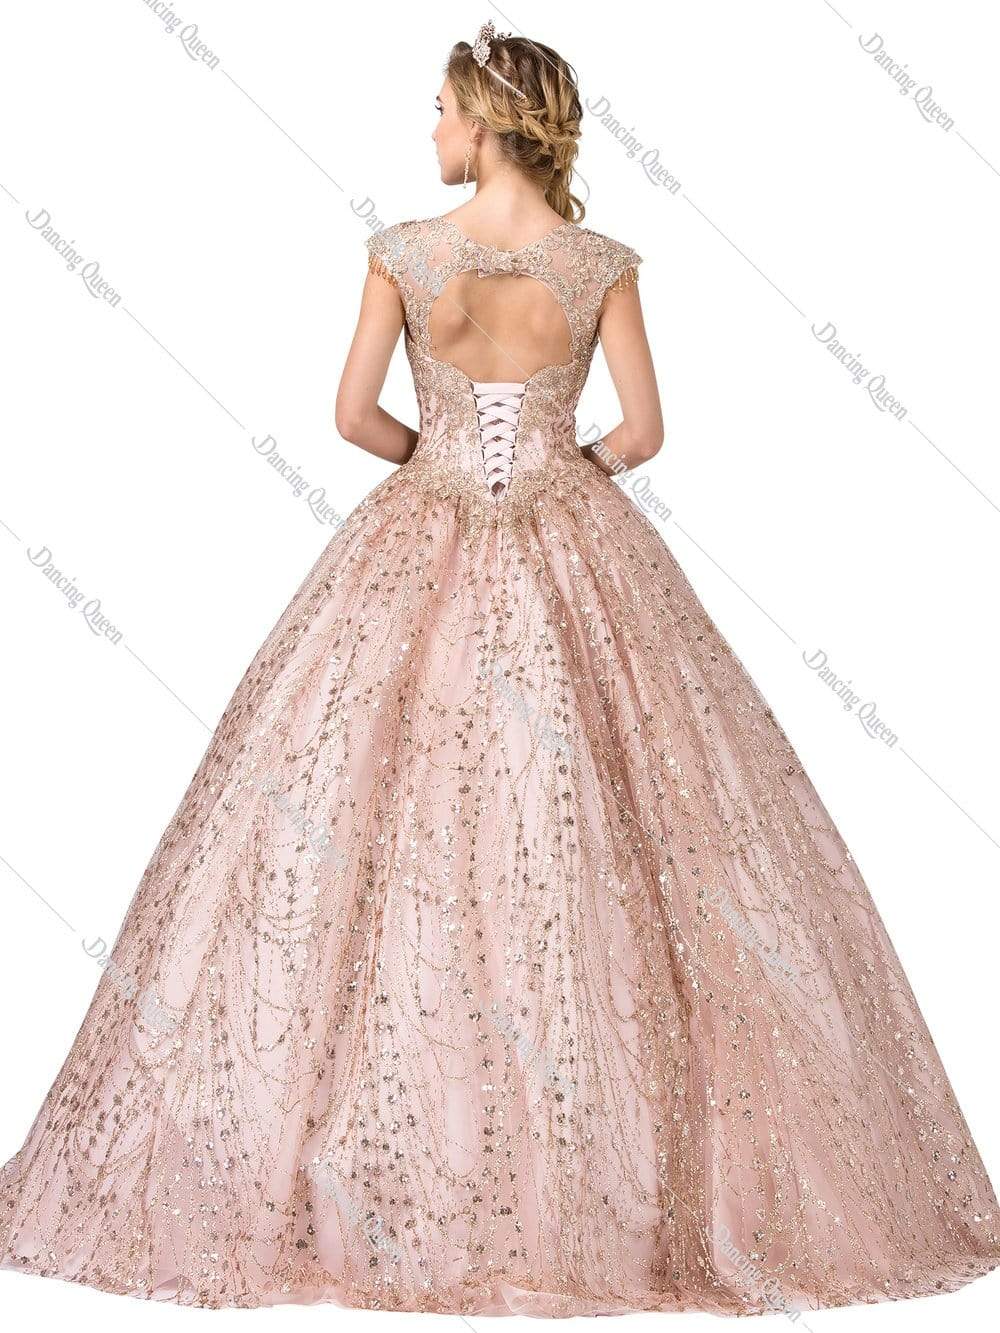 Dancing Queen - 1397 Sweetheart Bodice Gold Accented Ballgown Special Occasion Dress